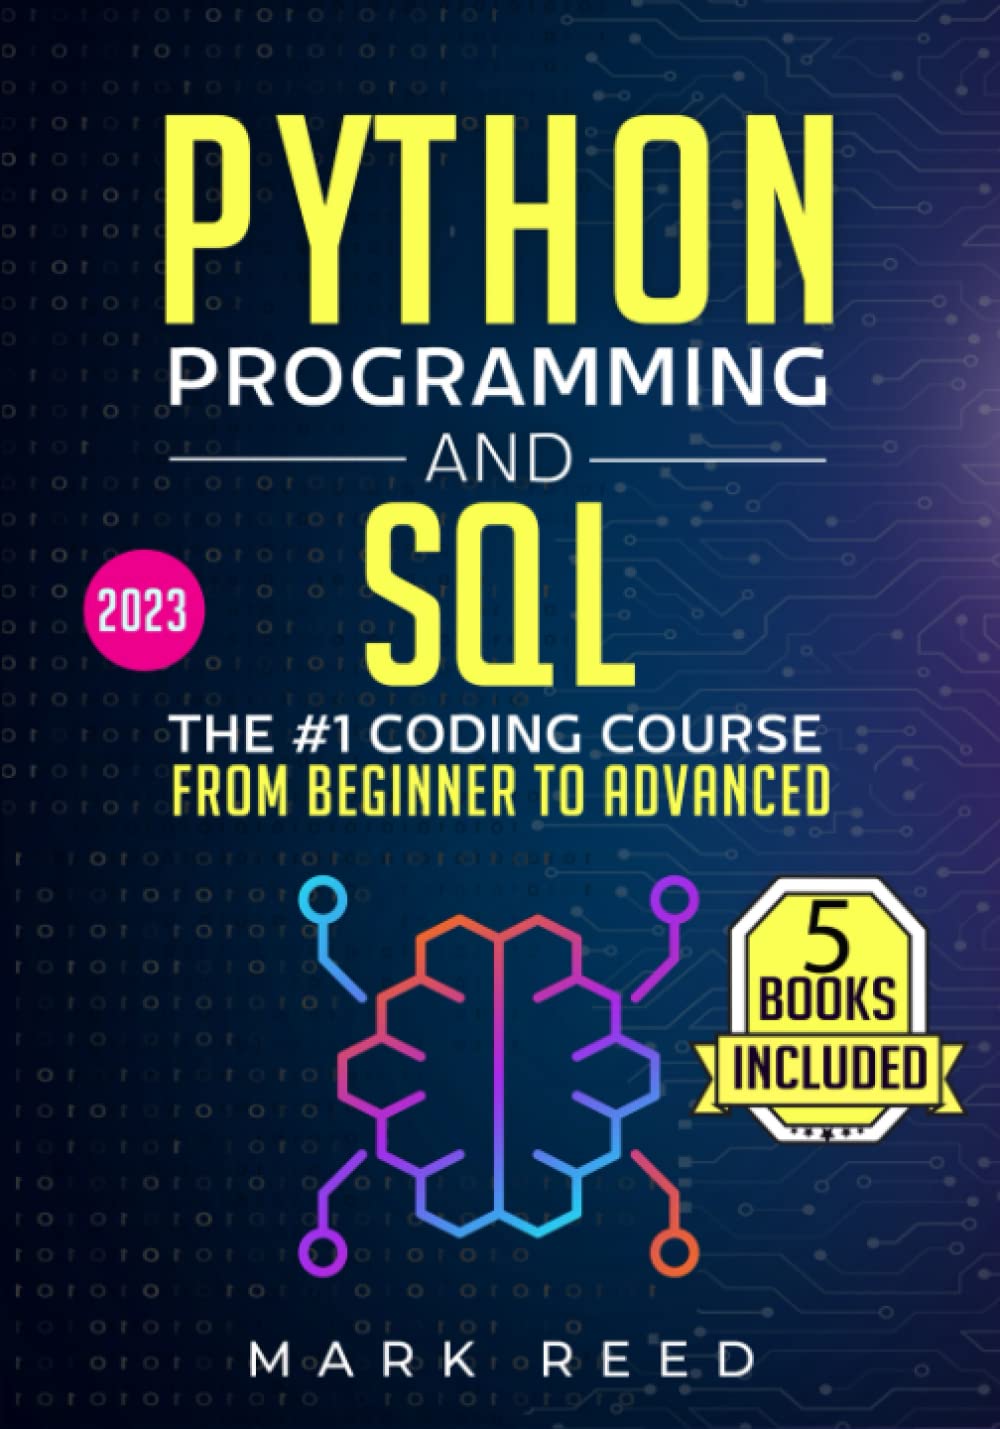 Python Programming and SQL: 5 books in 1 - The #1 Coding Course from Beginner to Advanced. Learn it Well & Fast (2023) (Computer Programming)